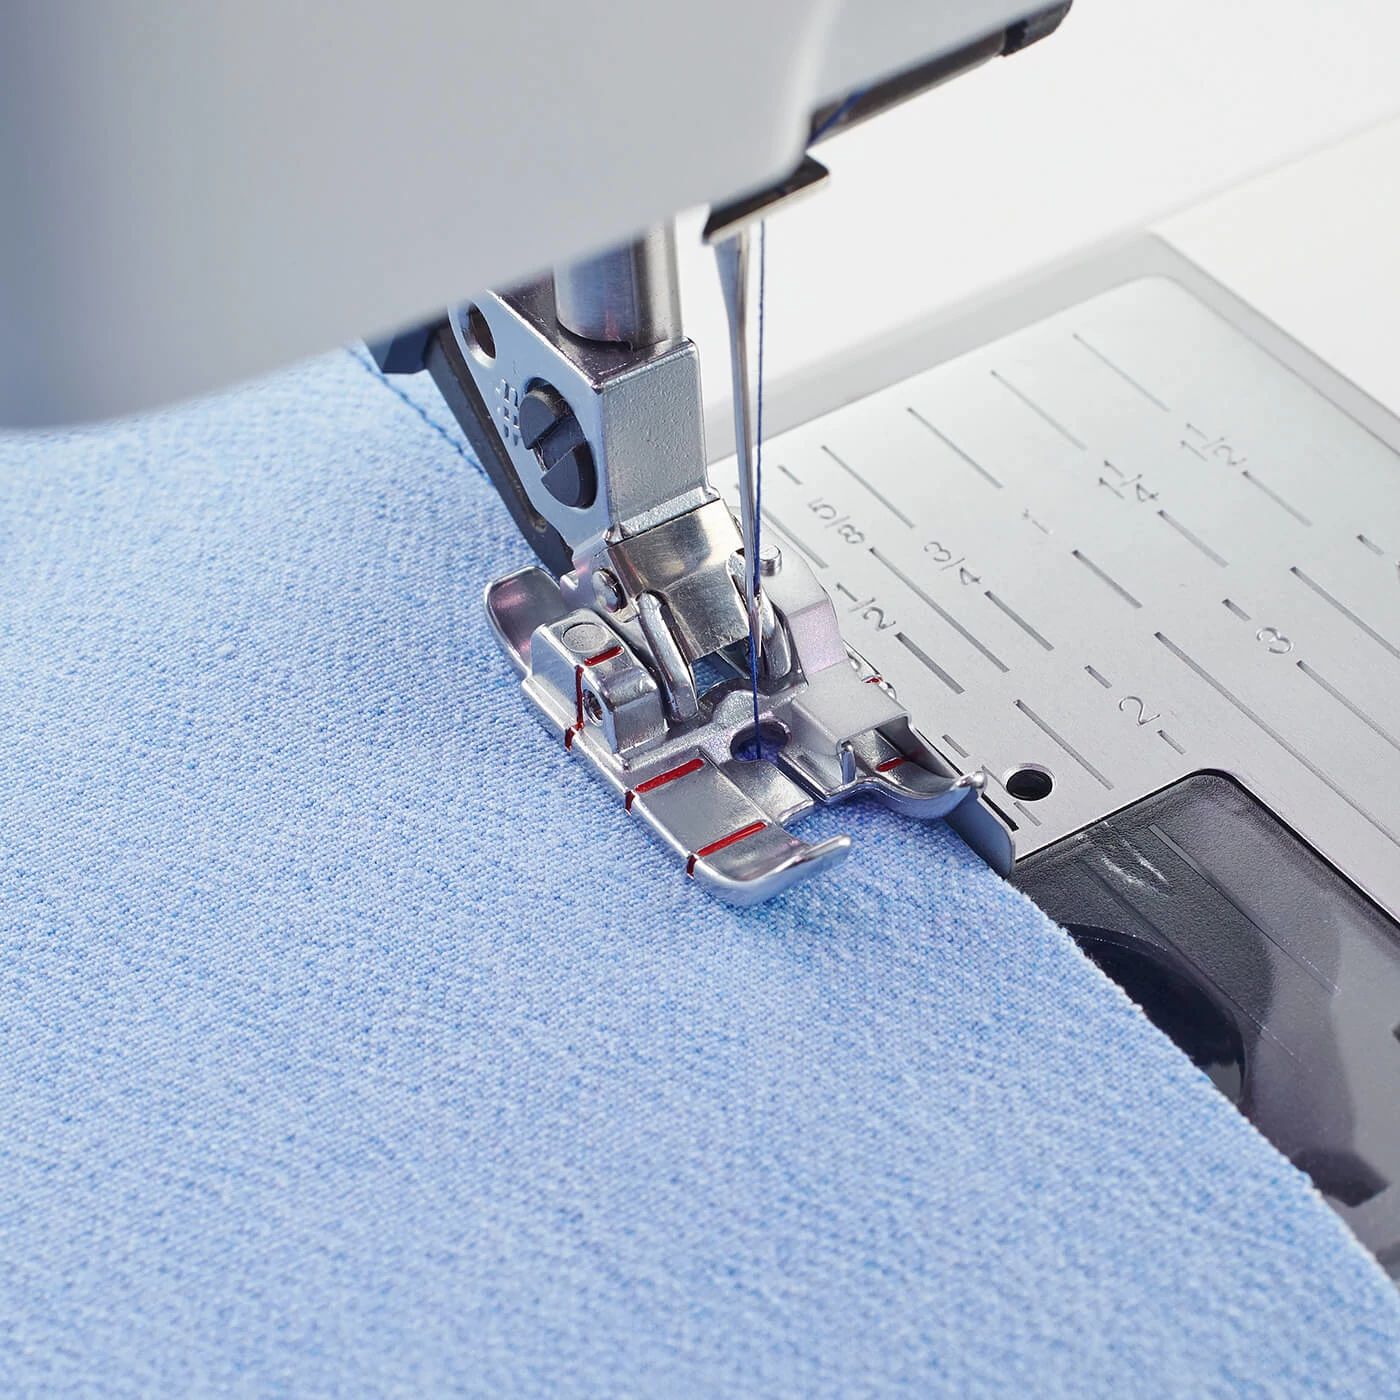 Best Handheld Sewing Machines for On-the-Go Repairs - Mighty Deals